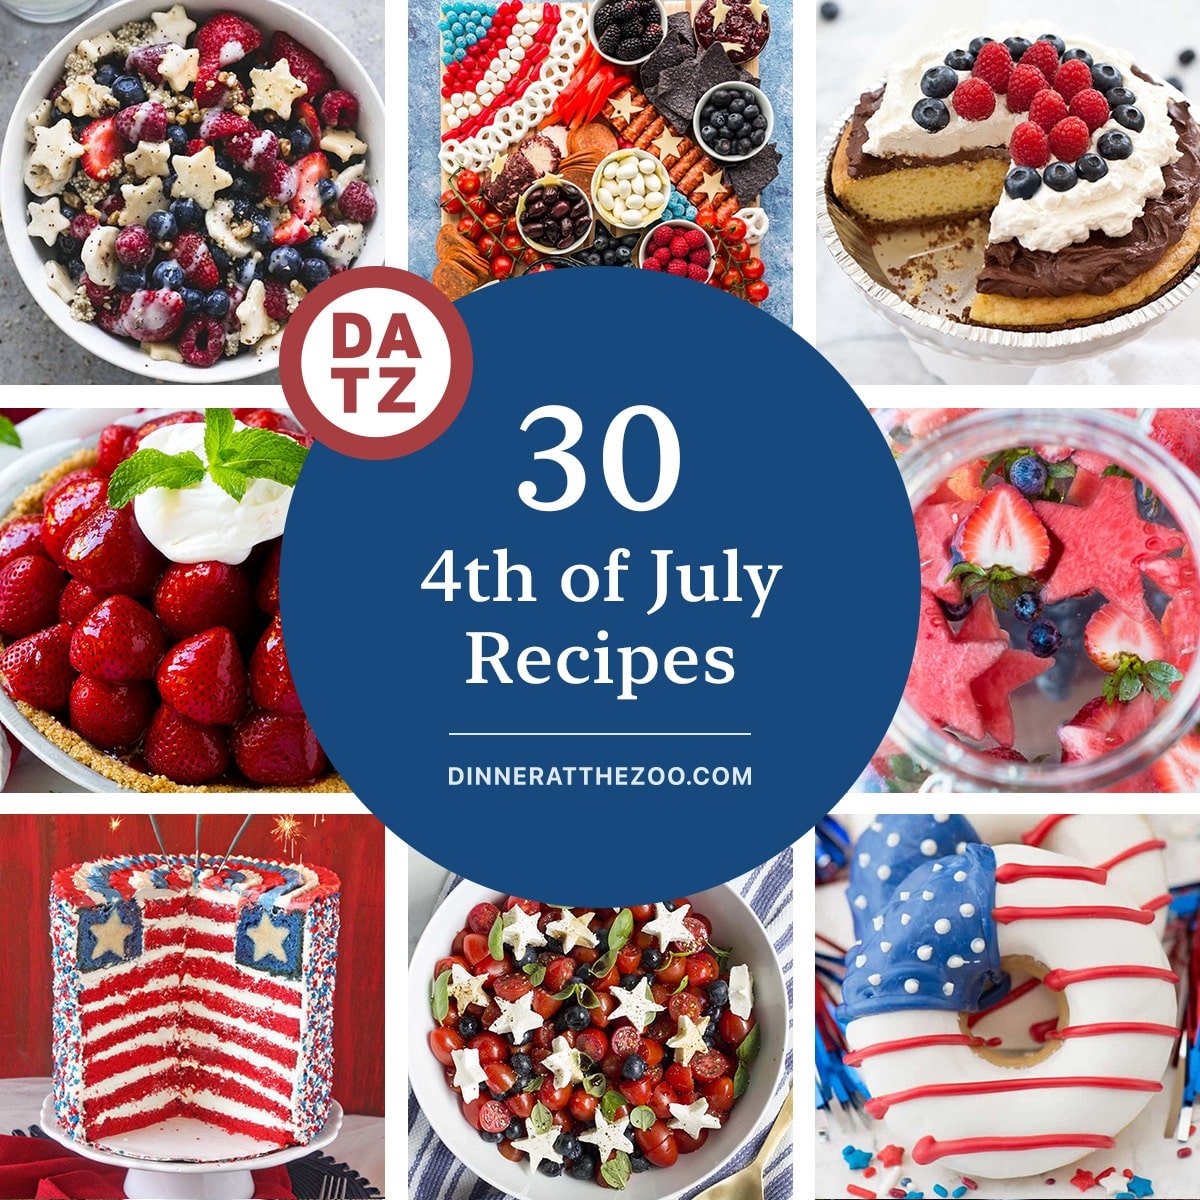 A collection of festive 4th of July recipes like fresh strawberry pie, American flag donuts, and a patriotic charcuterie board.